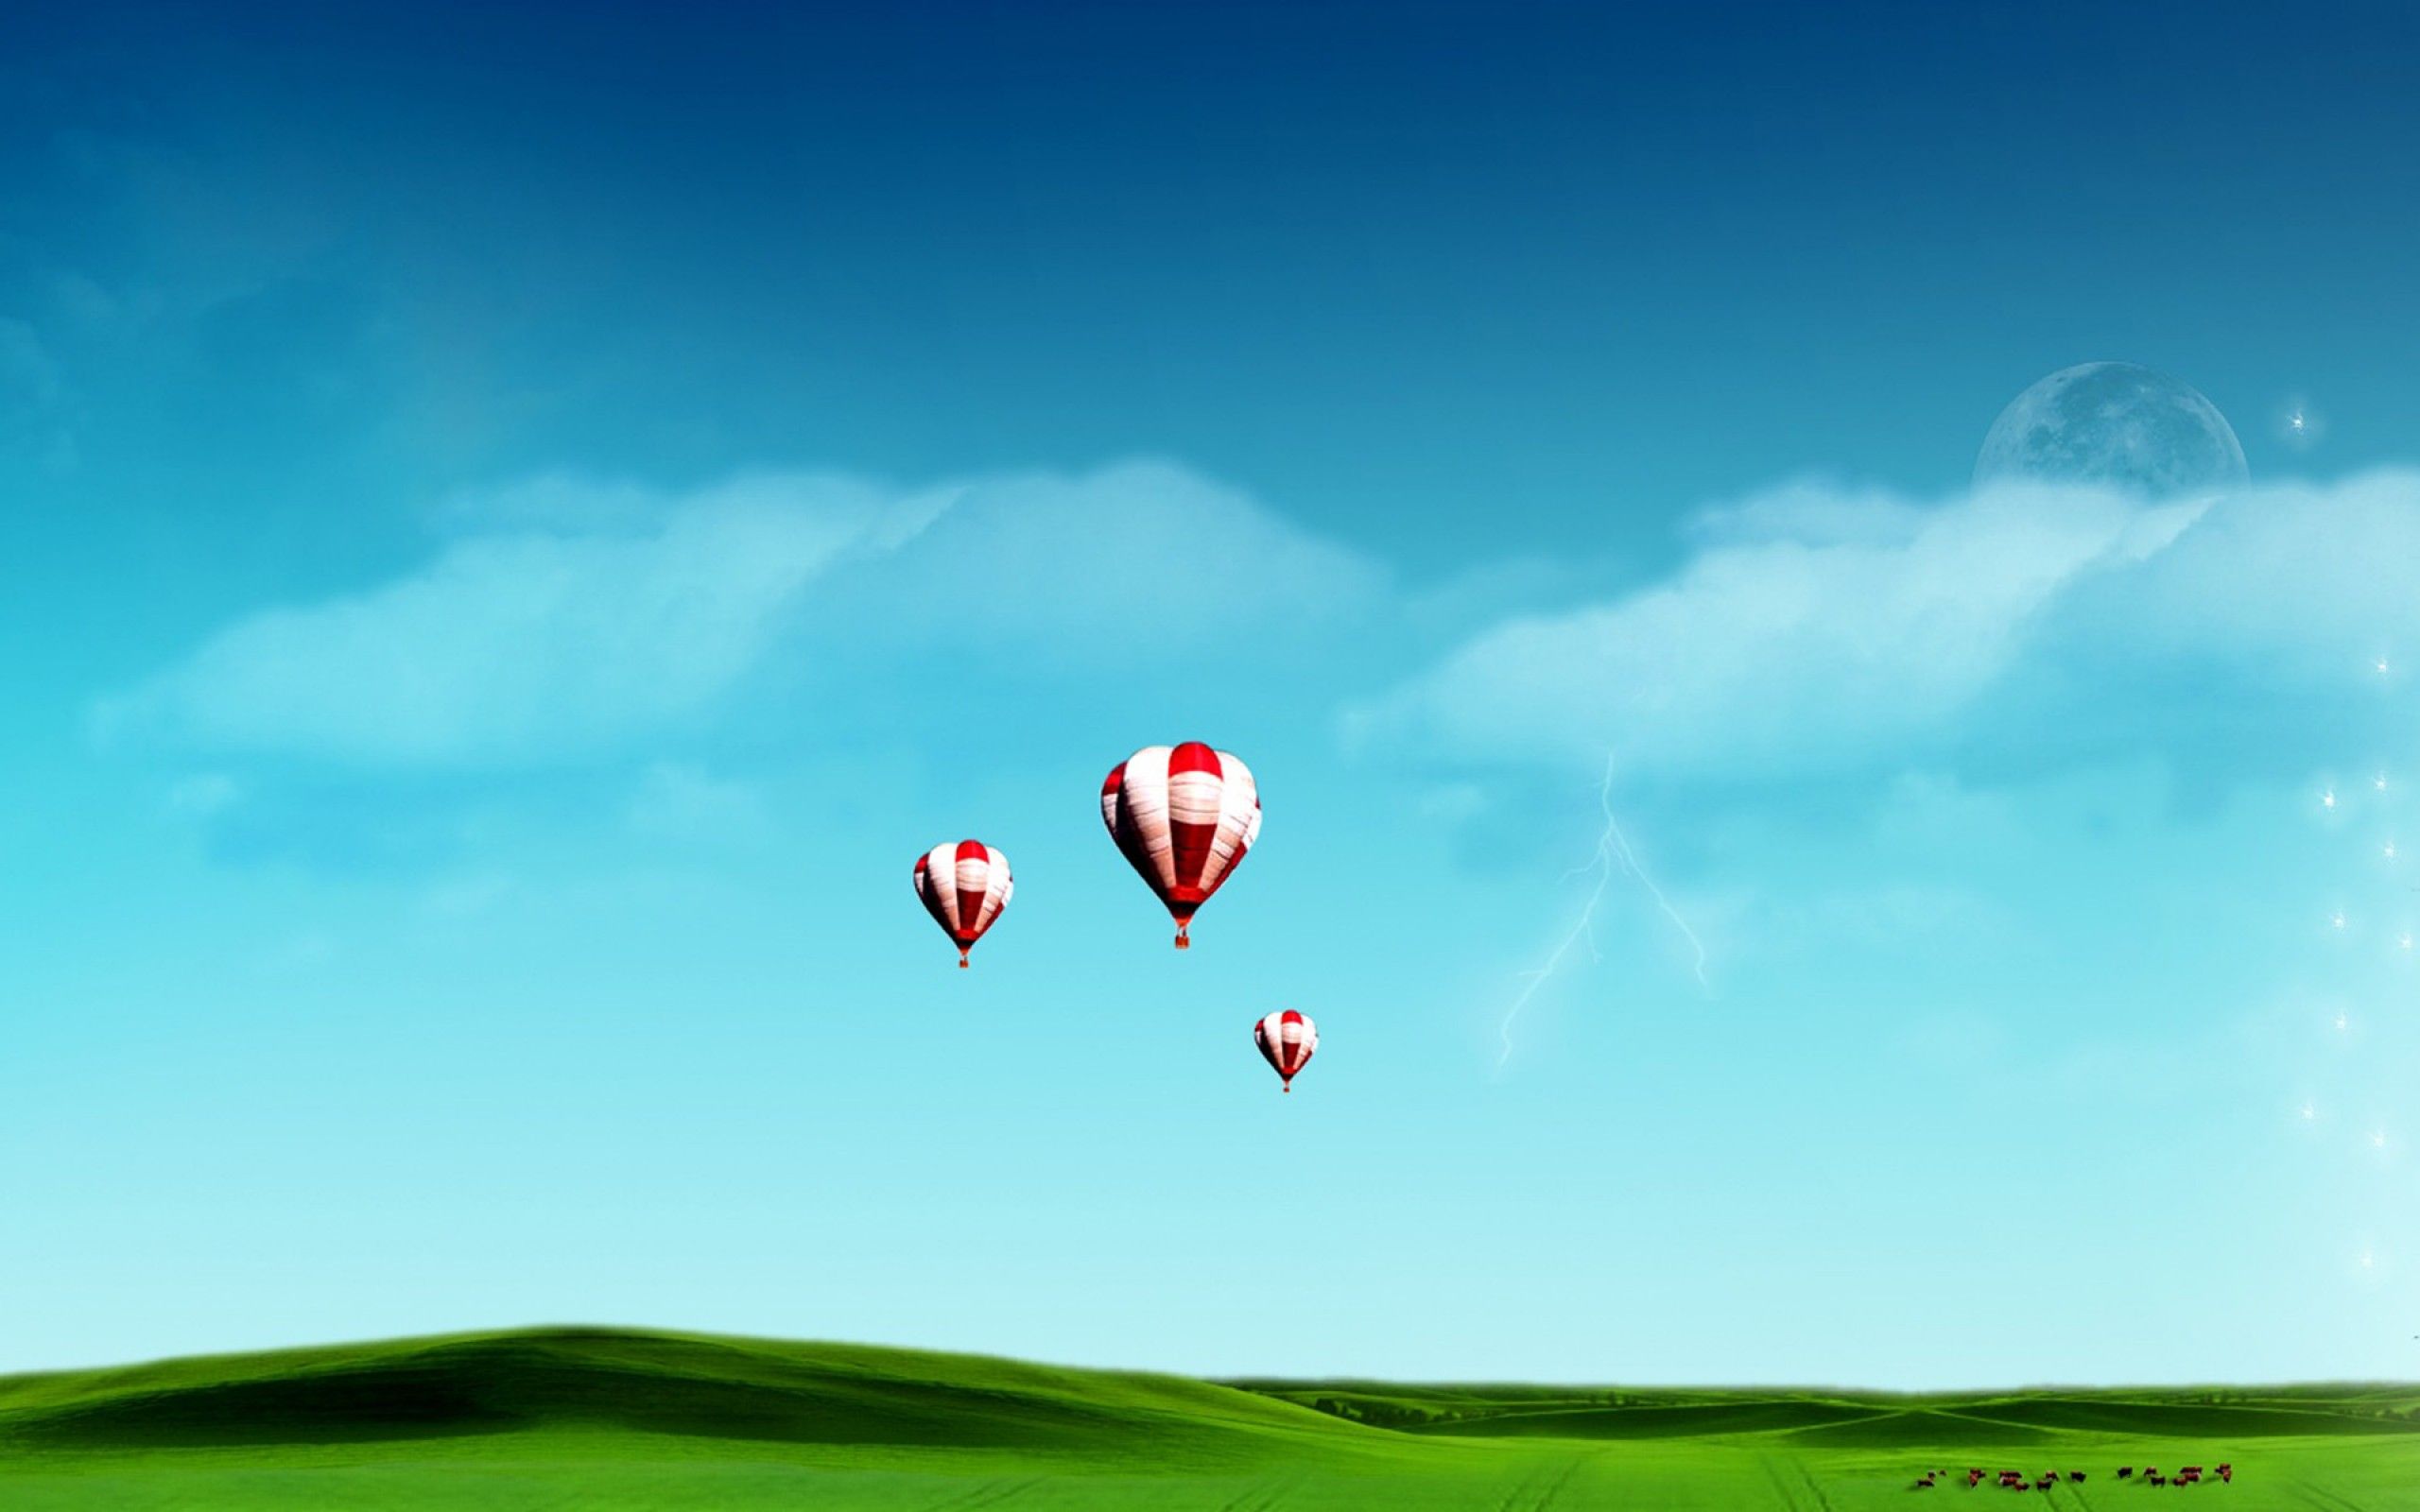 latest new wallpaper for mobile,hot air ballooning,hot air balloon,sky,daytime,cloud